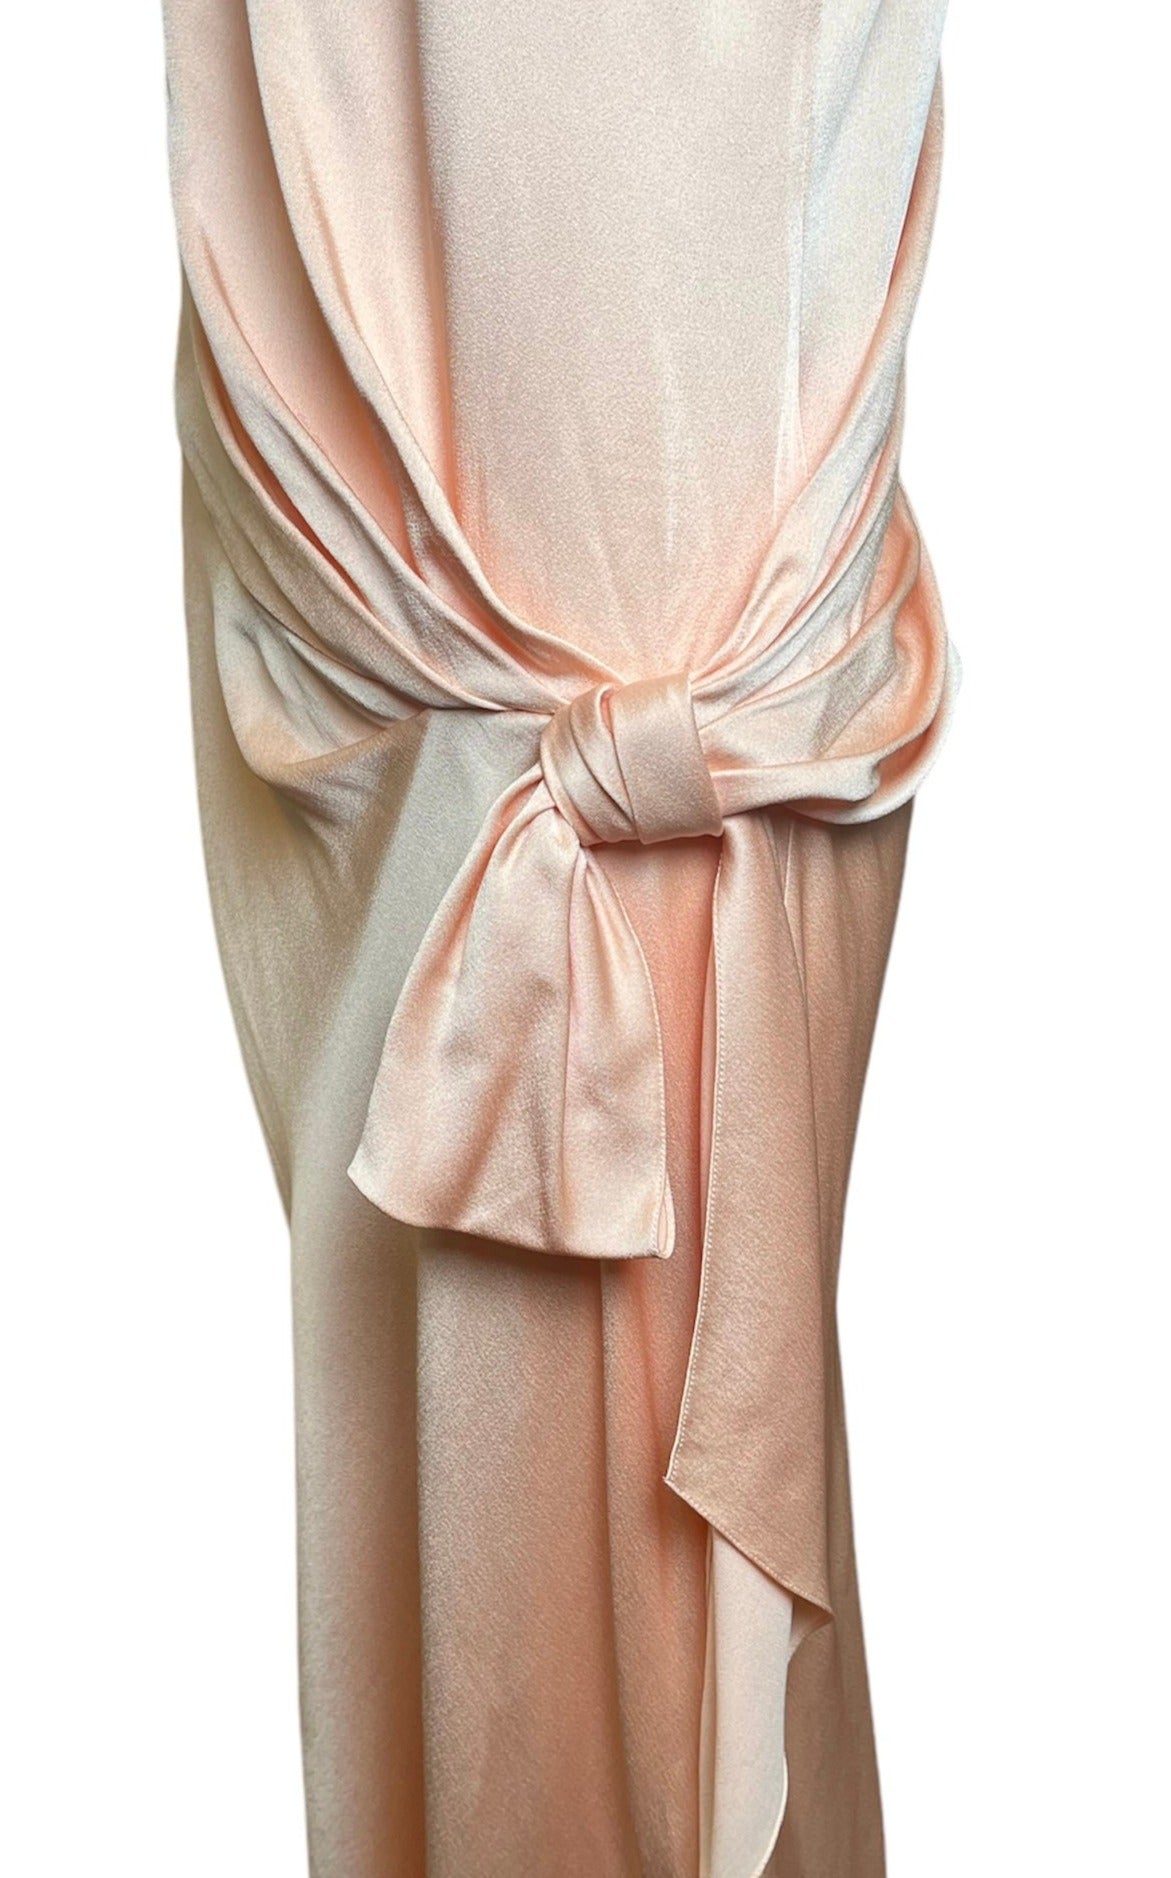  John Galliano 2000s Peachy Pink 1930s Inspired  Bias Cut Gown HIP DETAIL 4 of 5